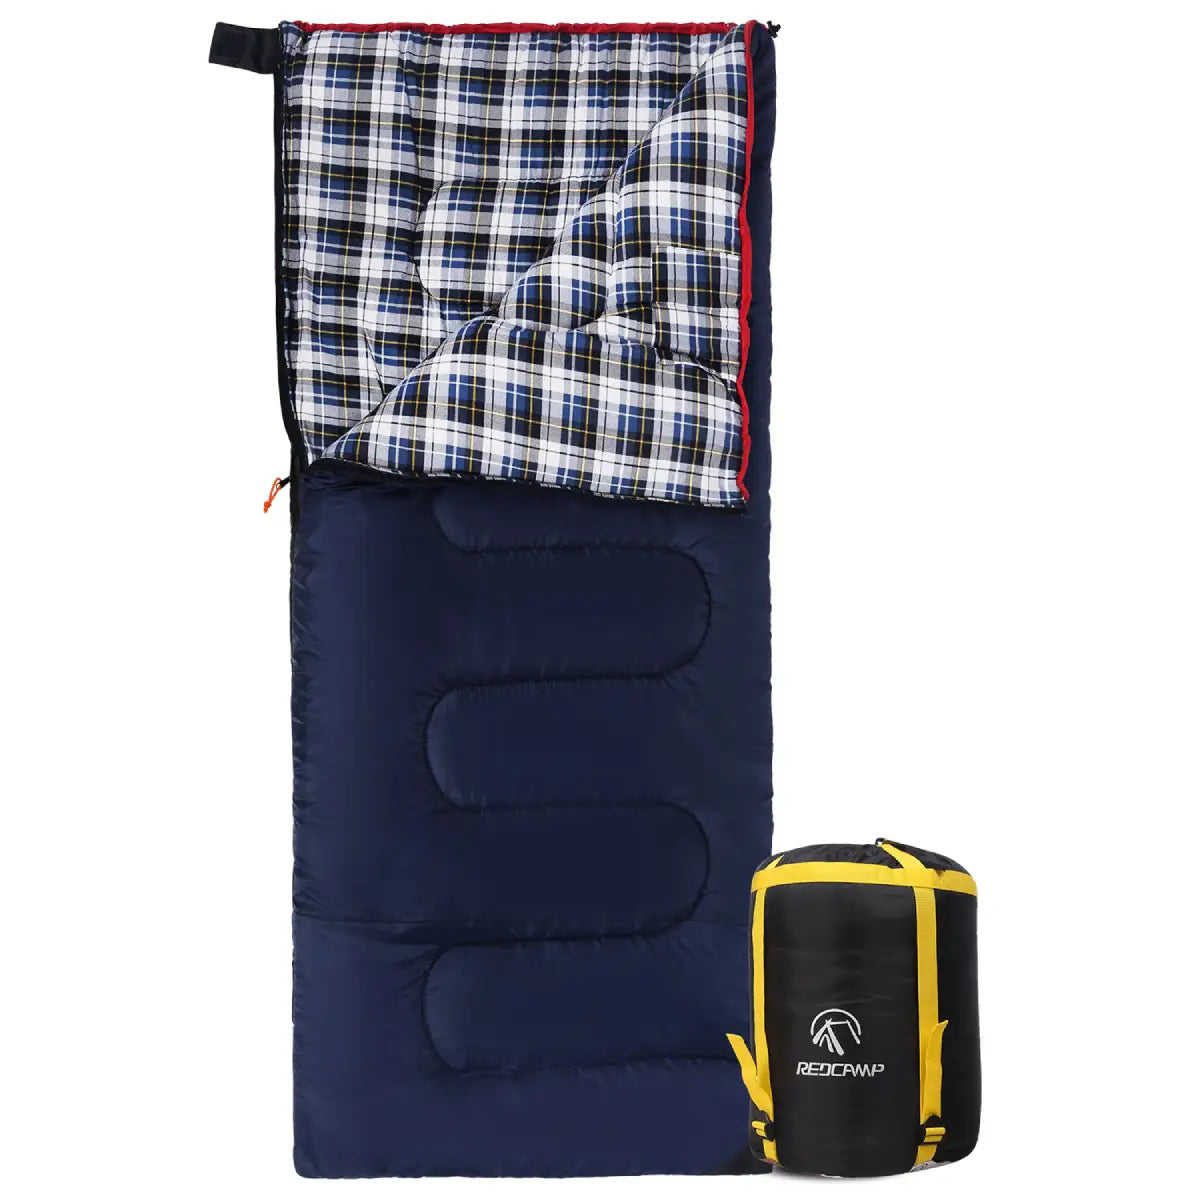 Camping Sleeping Bag for Adult with Cotton Flannel Liner